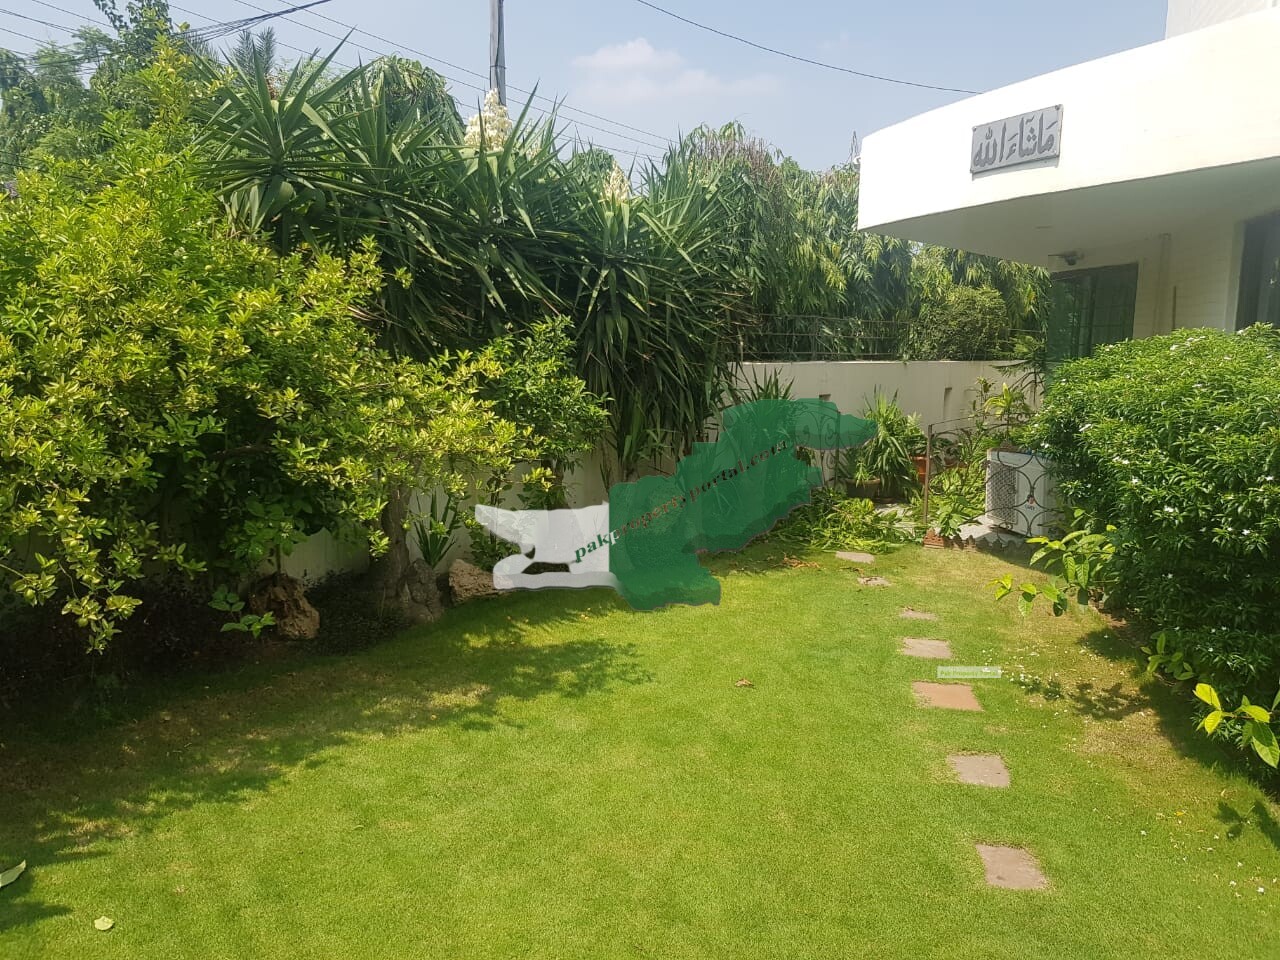 23 Marla House for sale in Dha phase 3 , X block  Lahore